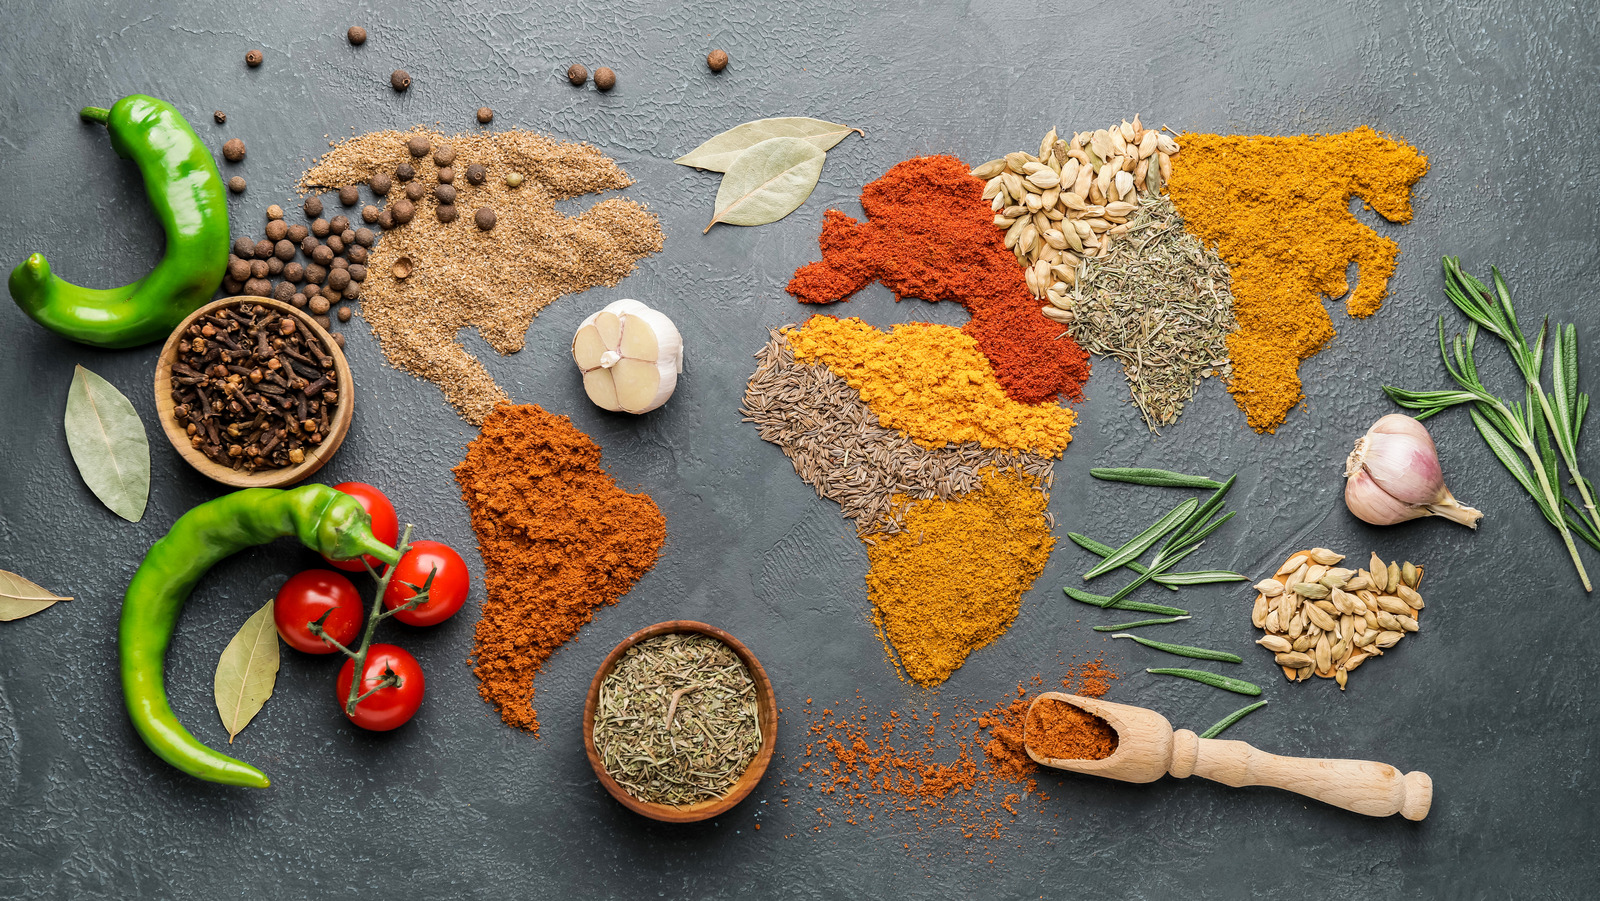 Global flavors are at the top of the restaurant industry trends list